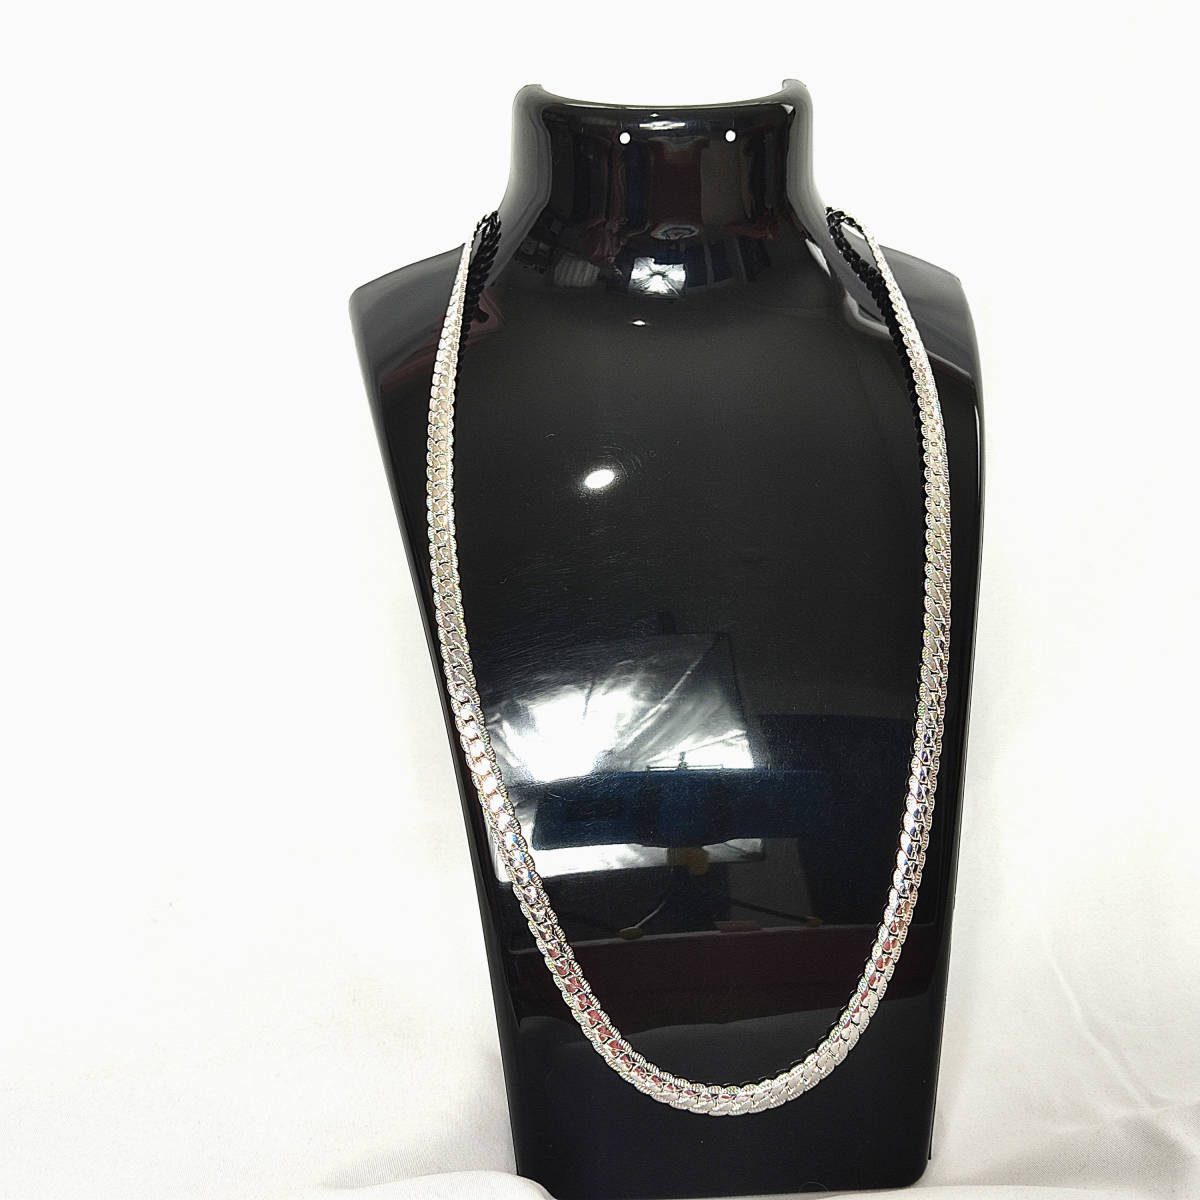 silver necklace メンズ レディース シルバー喜平 ネックレス 48cm チェーンネックレス 925 刻印あり16_画像1